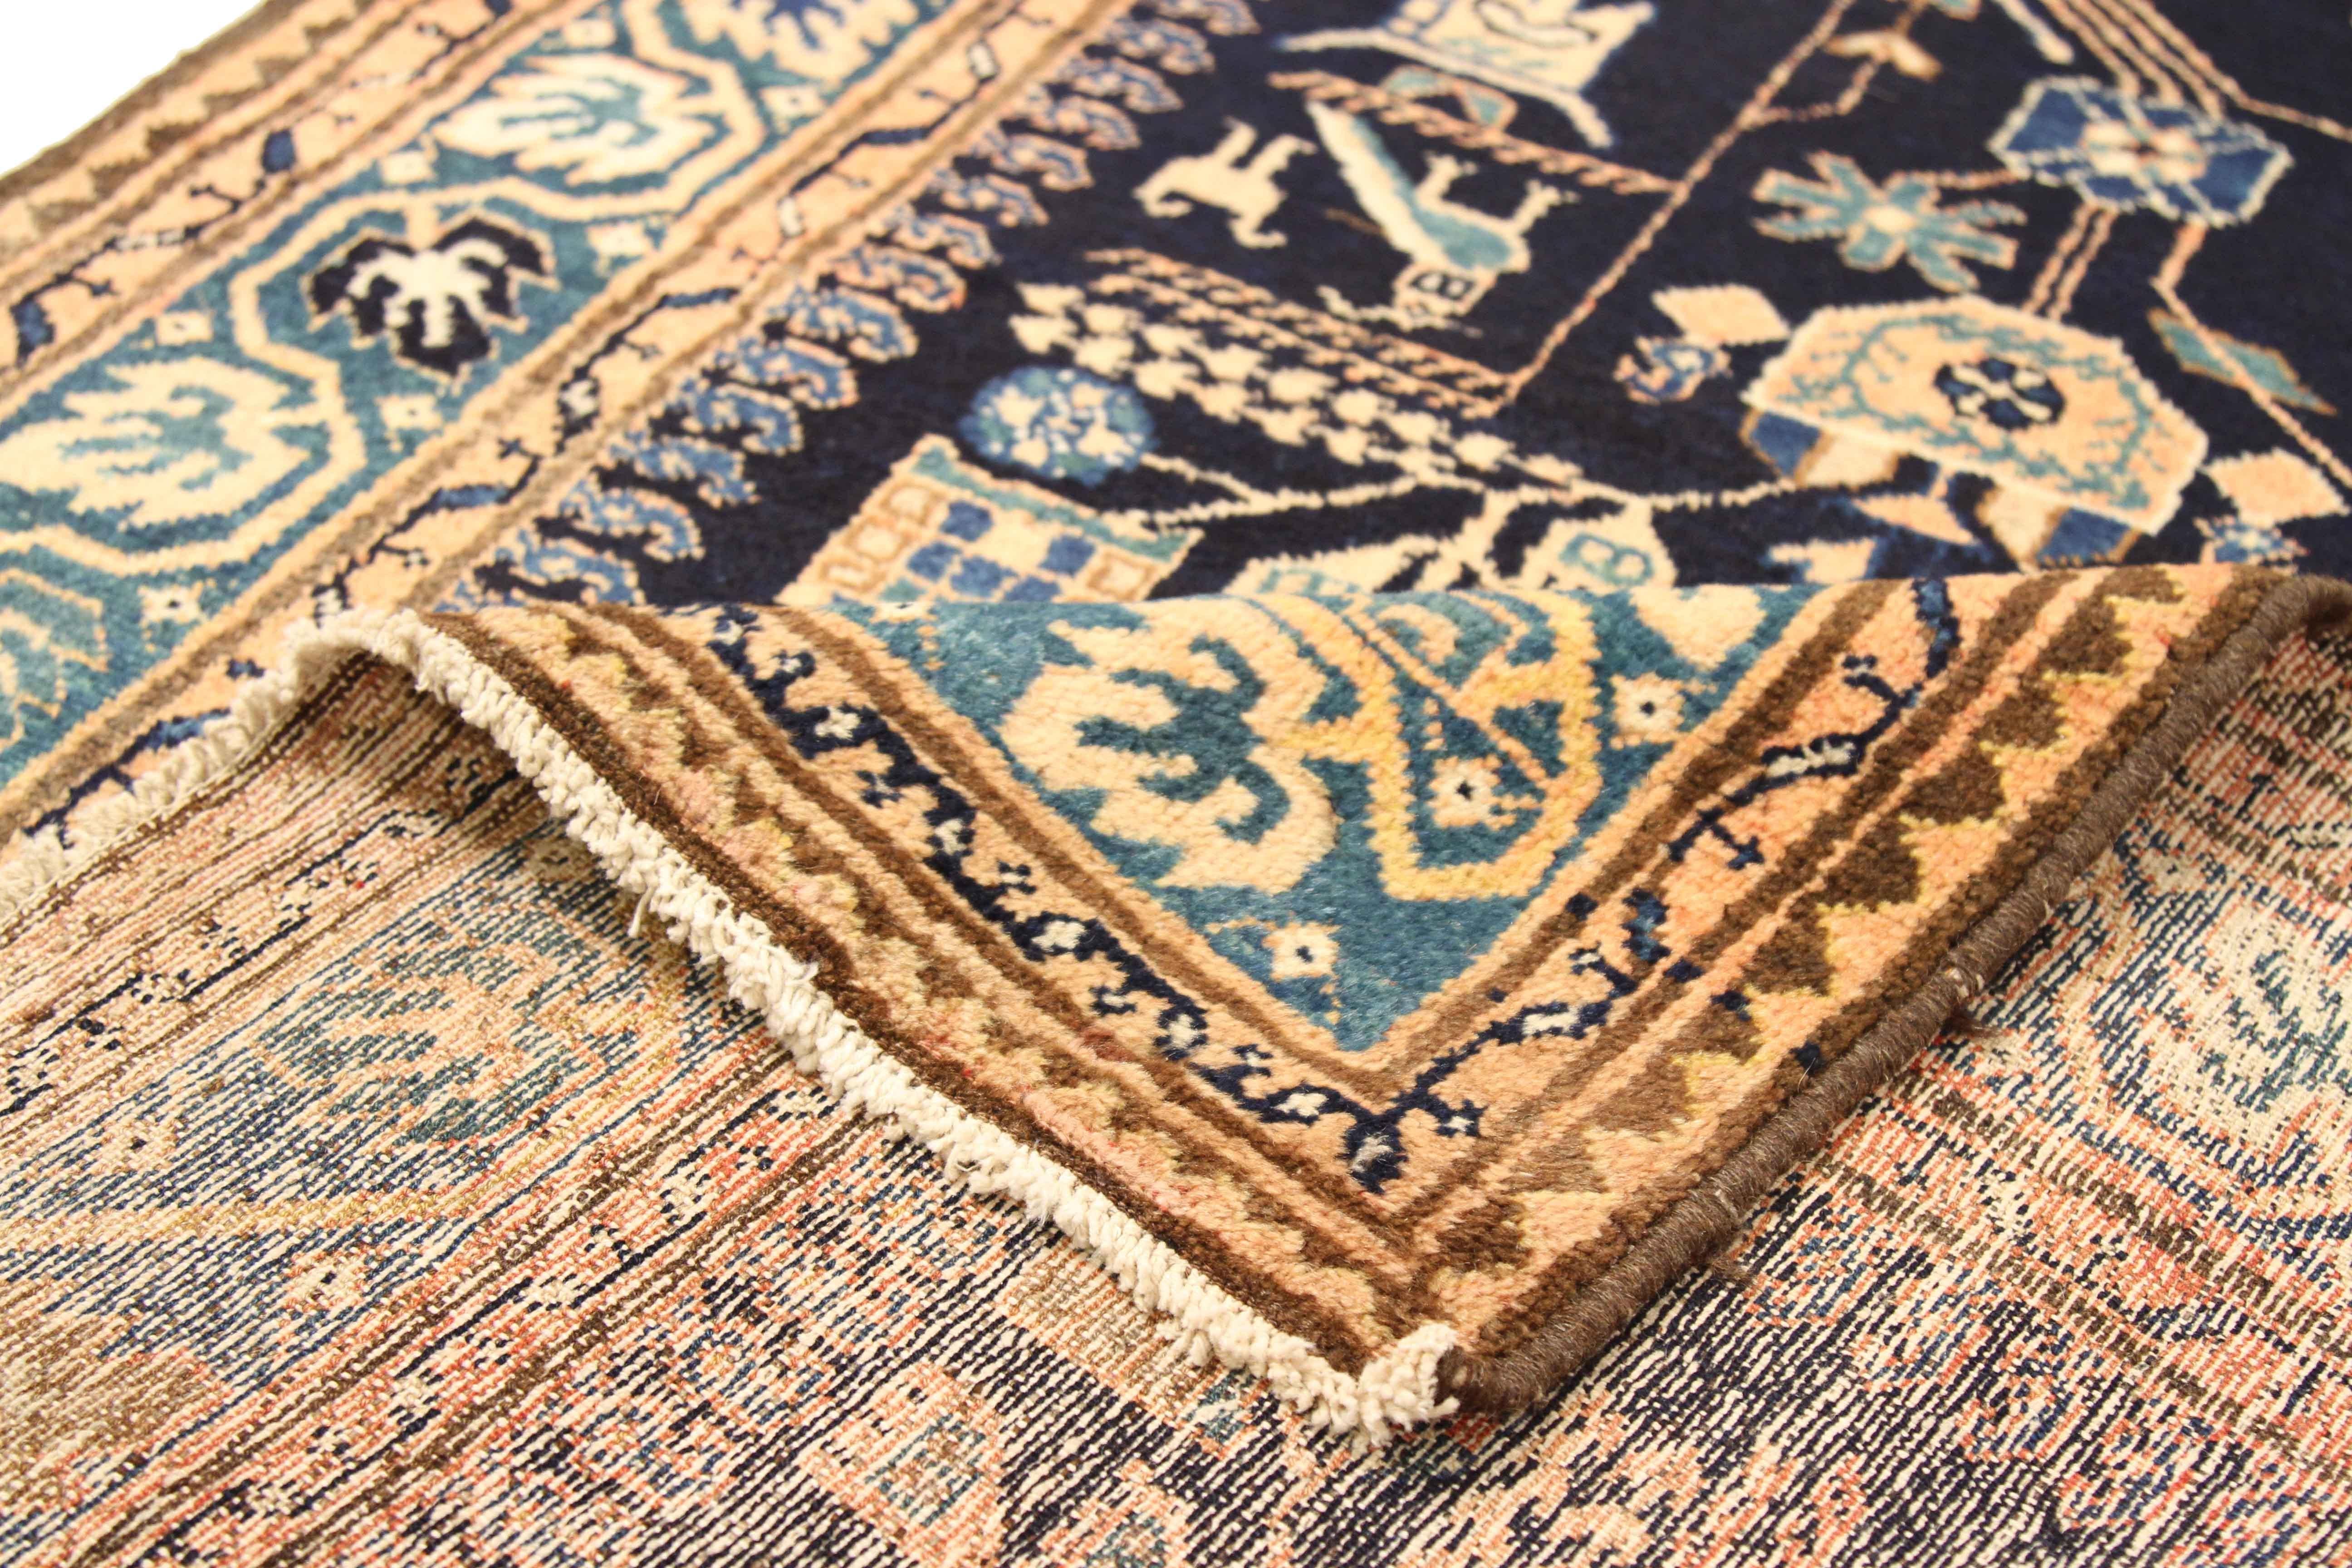 Antique Persian runner rug handwoven from the finest sheep’s wool and colored with all-natural vegetable dyes that are safe for humans and pets. It’s a traditional Malayer design featuring a series of animal and geometric designs in beige, navy blue